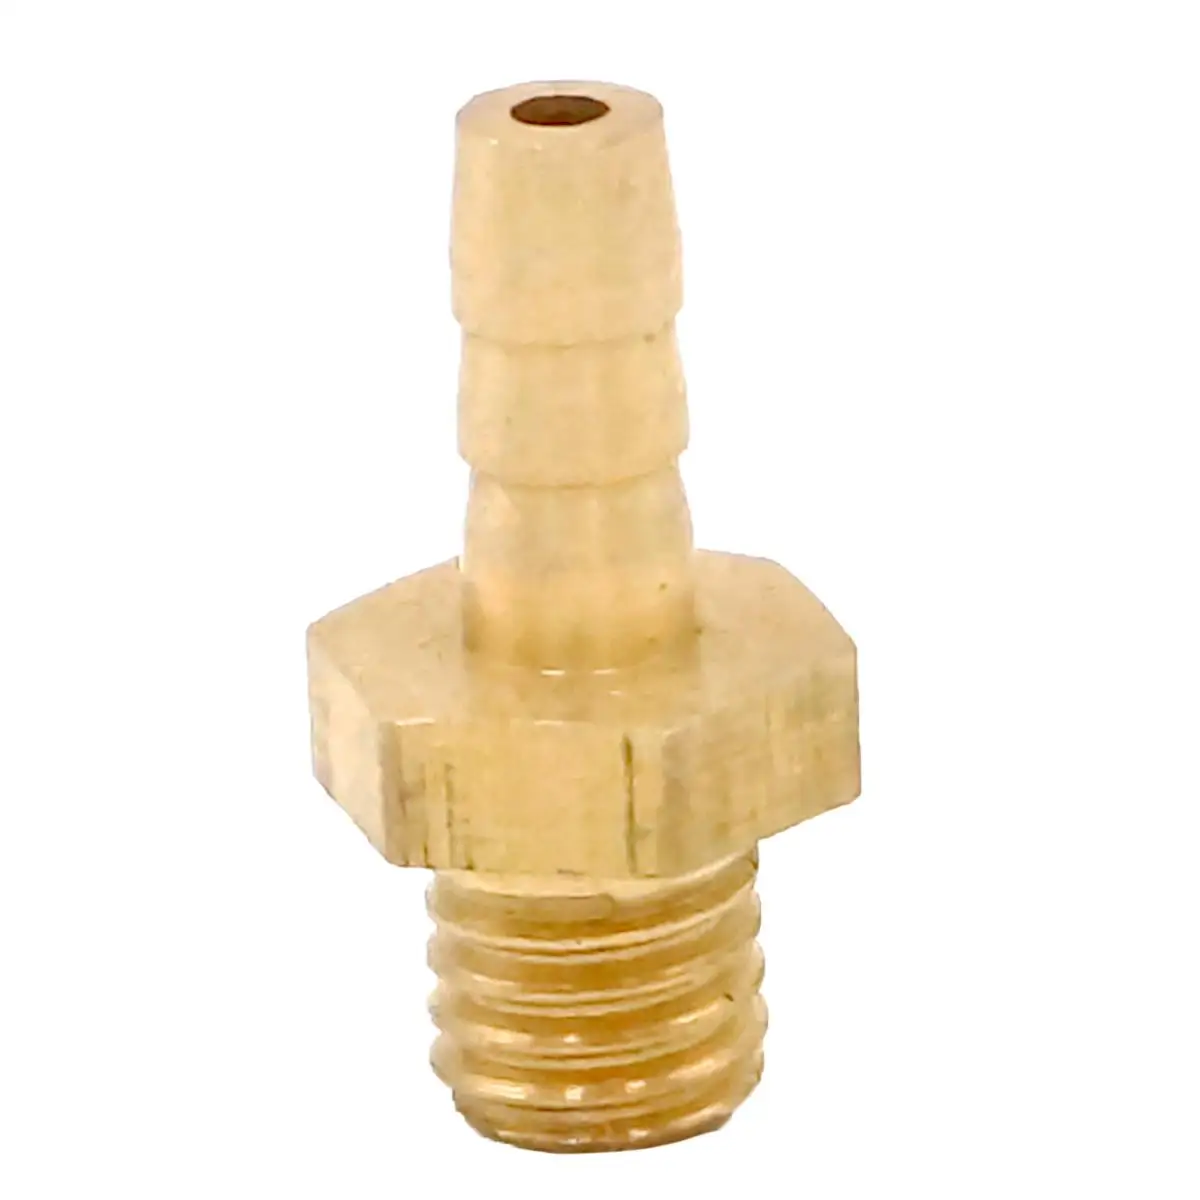 Xucus 3mm OD Hose Barb x M5 Metric Male Thread Brass Barbed Pipe Fitting Coupler Connector Adapter Splicer for Fuel Gas Water